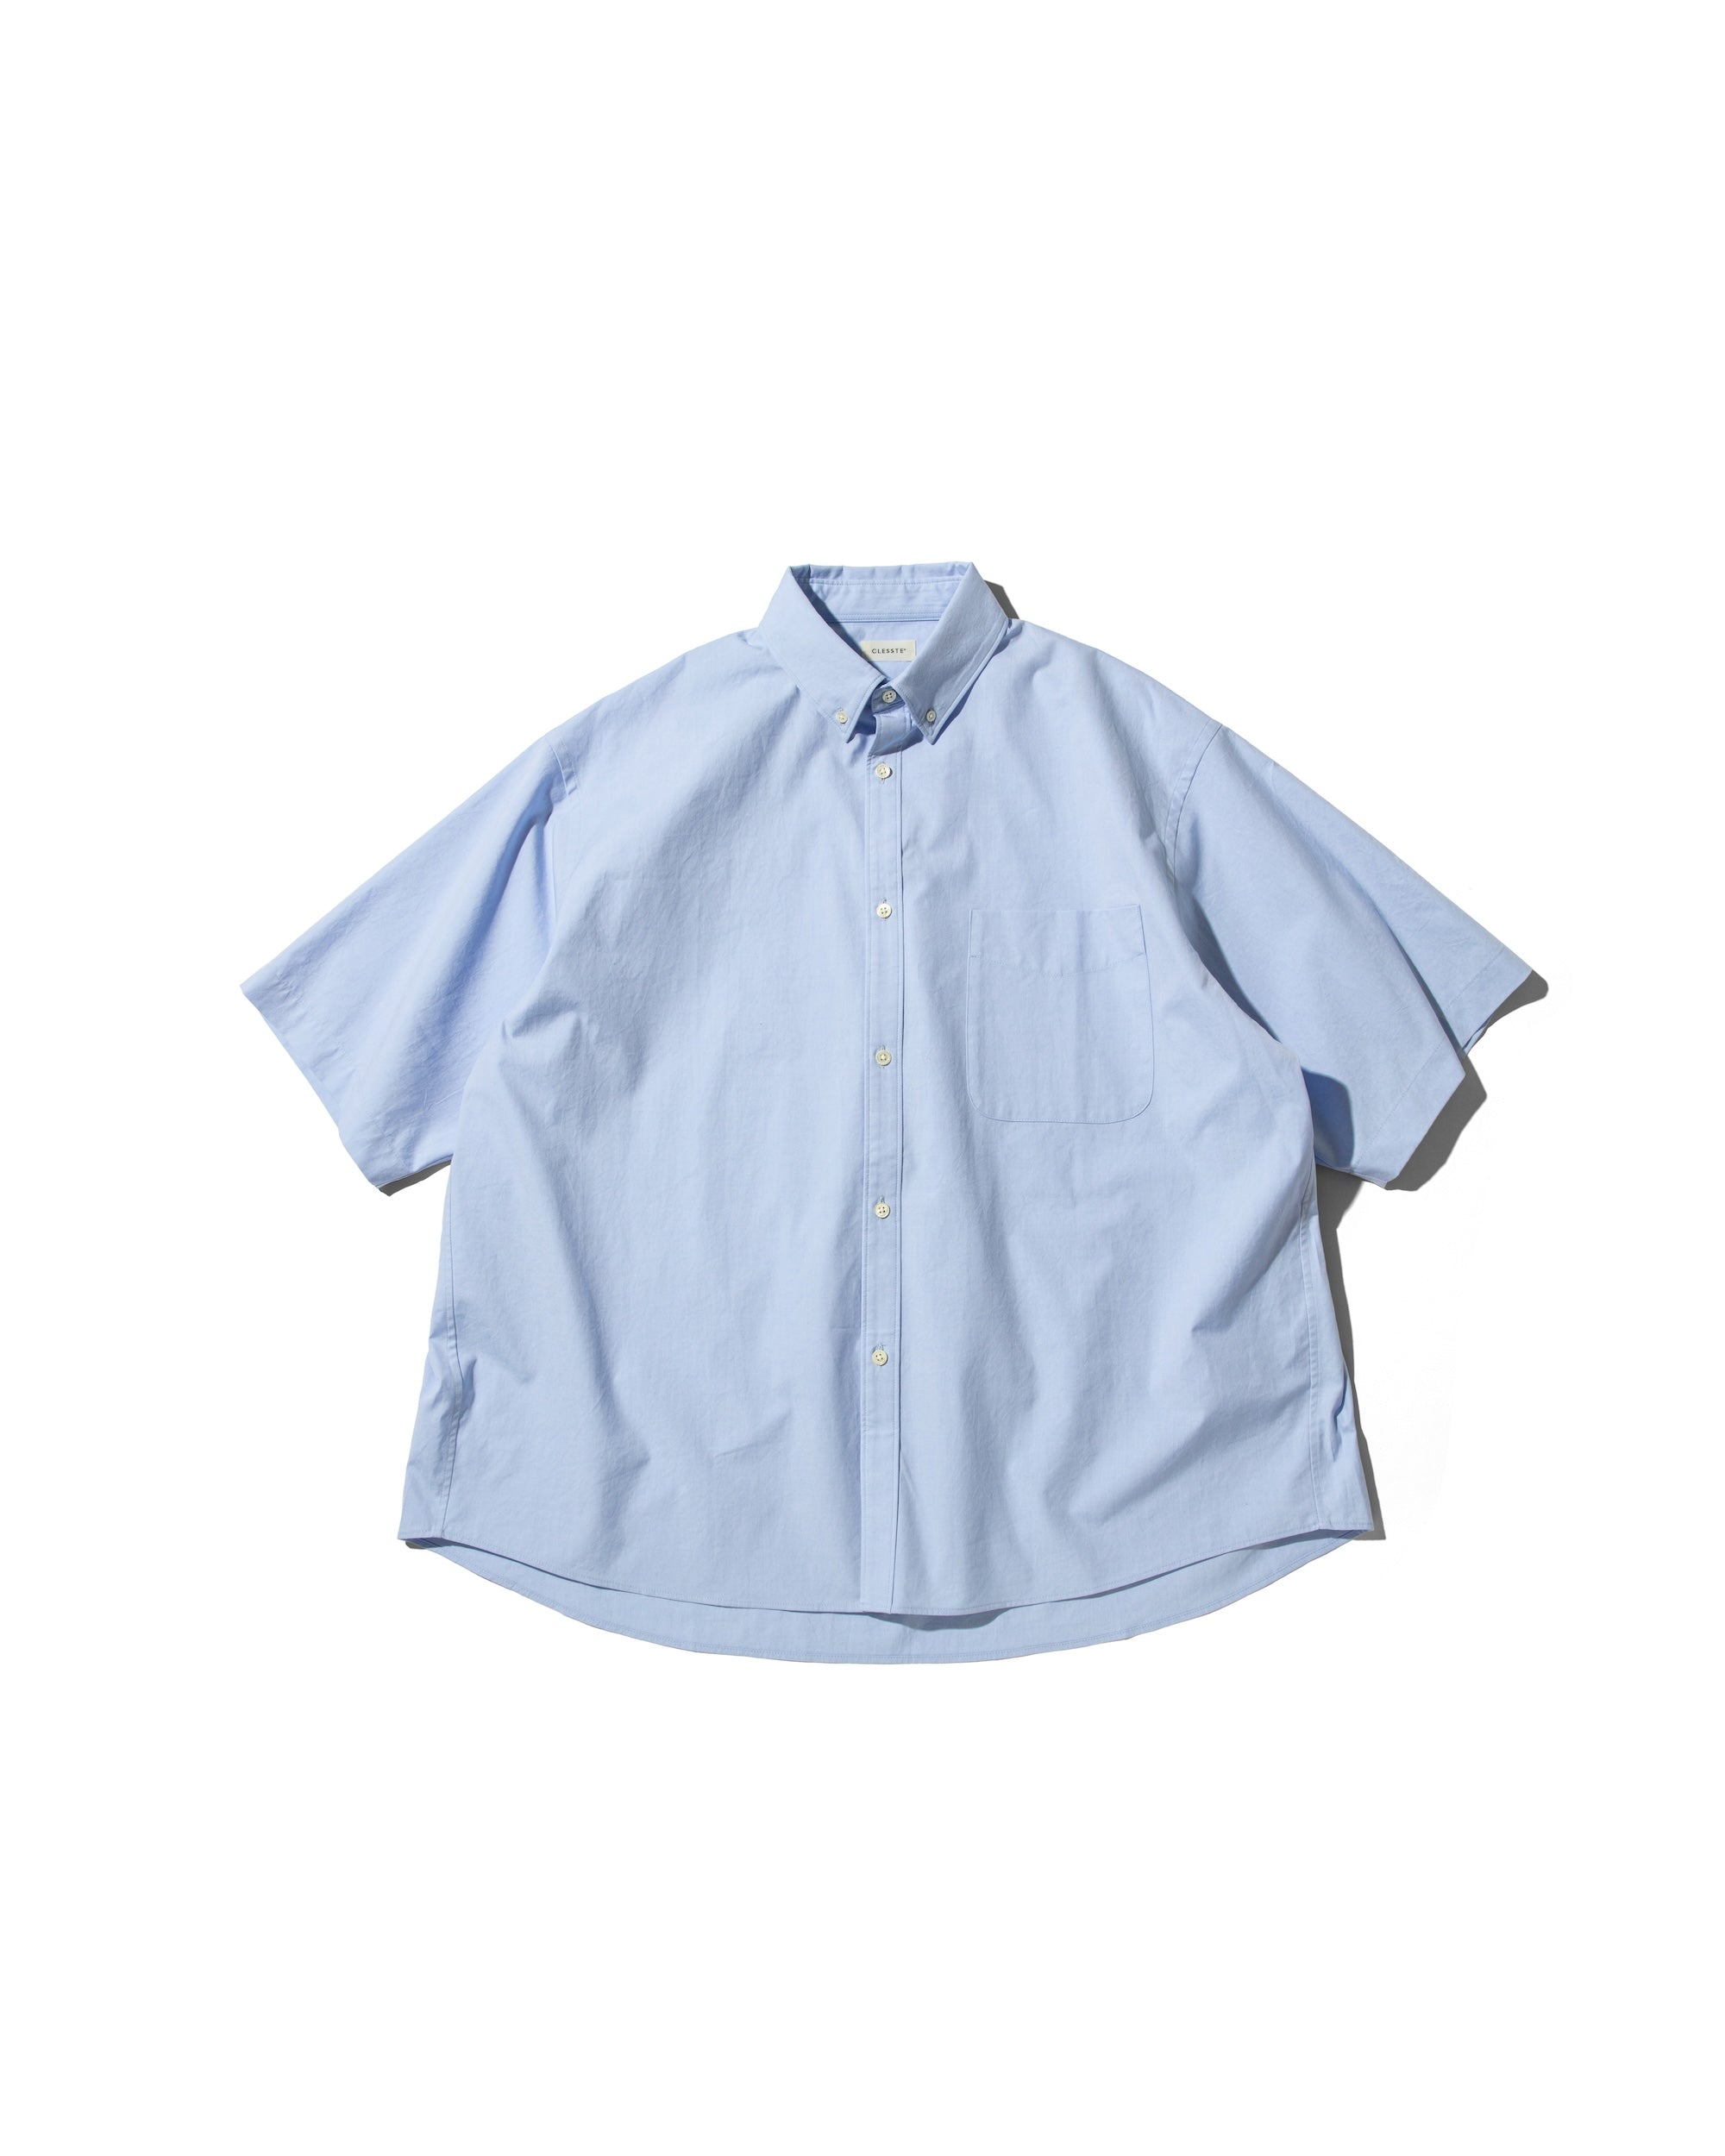 【6.22 SAT 20:00- IN STOCK】OXFORD CITY S/S BD SHIRT